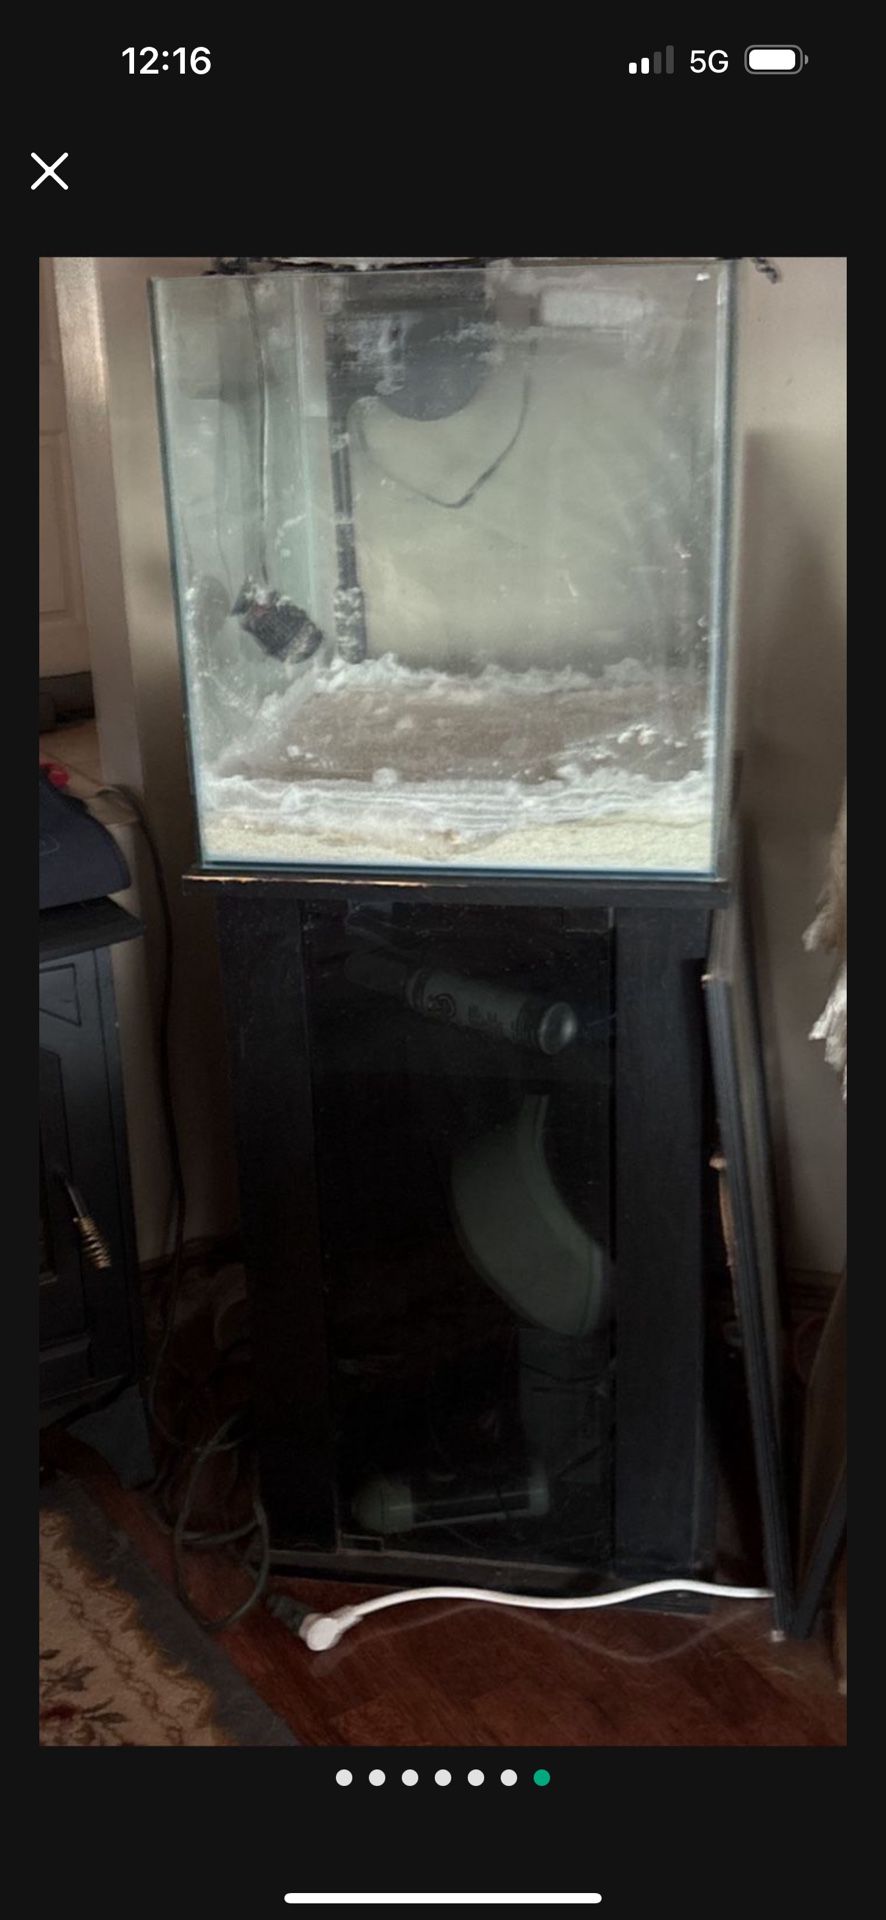 Fish tank stand and All Accessories 